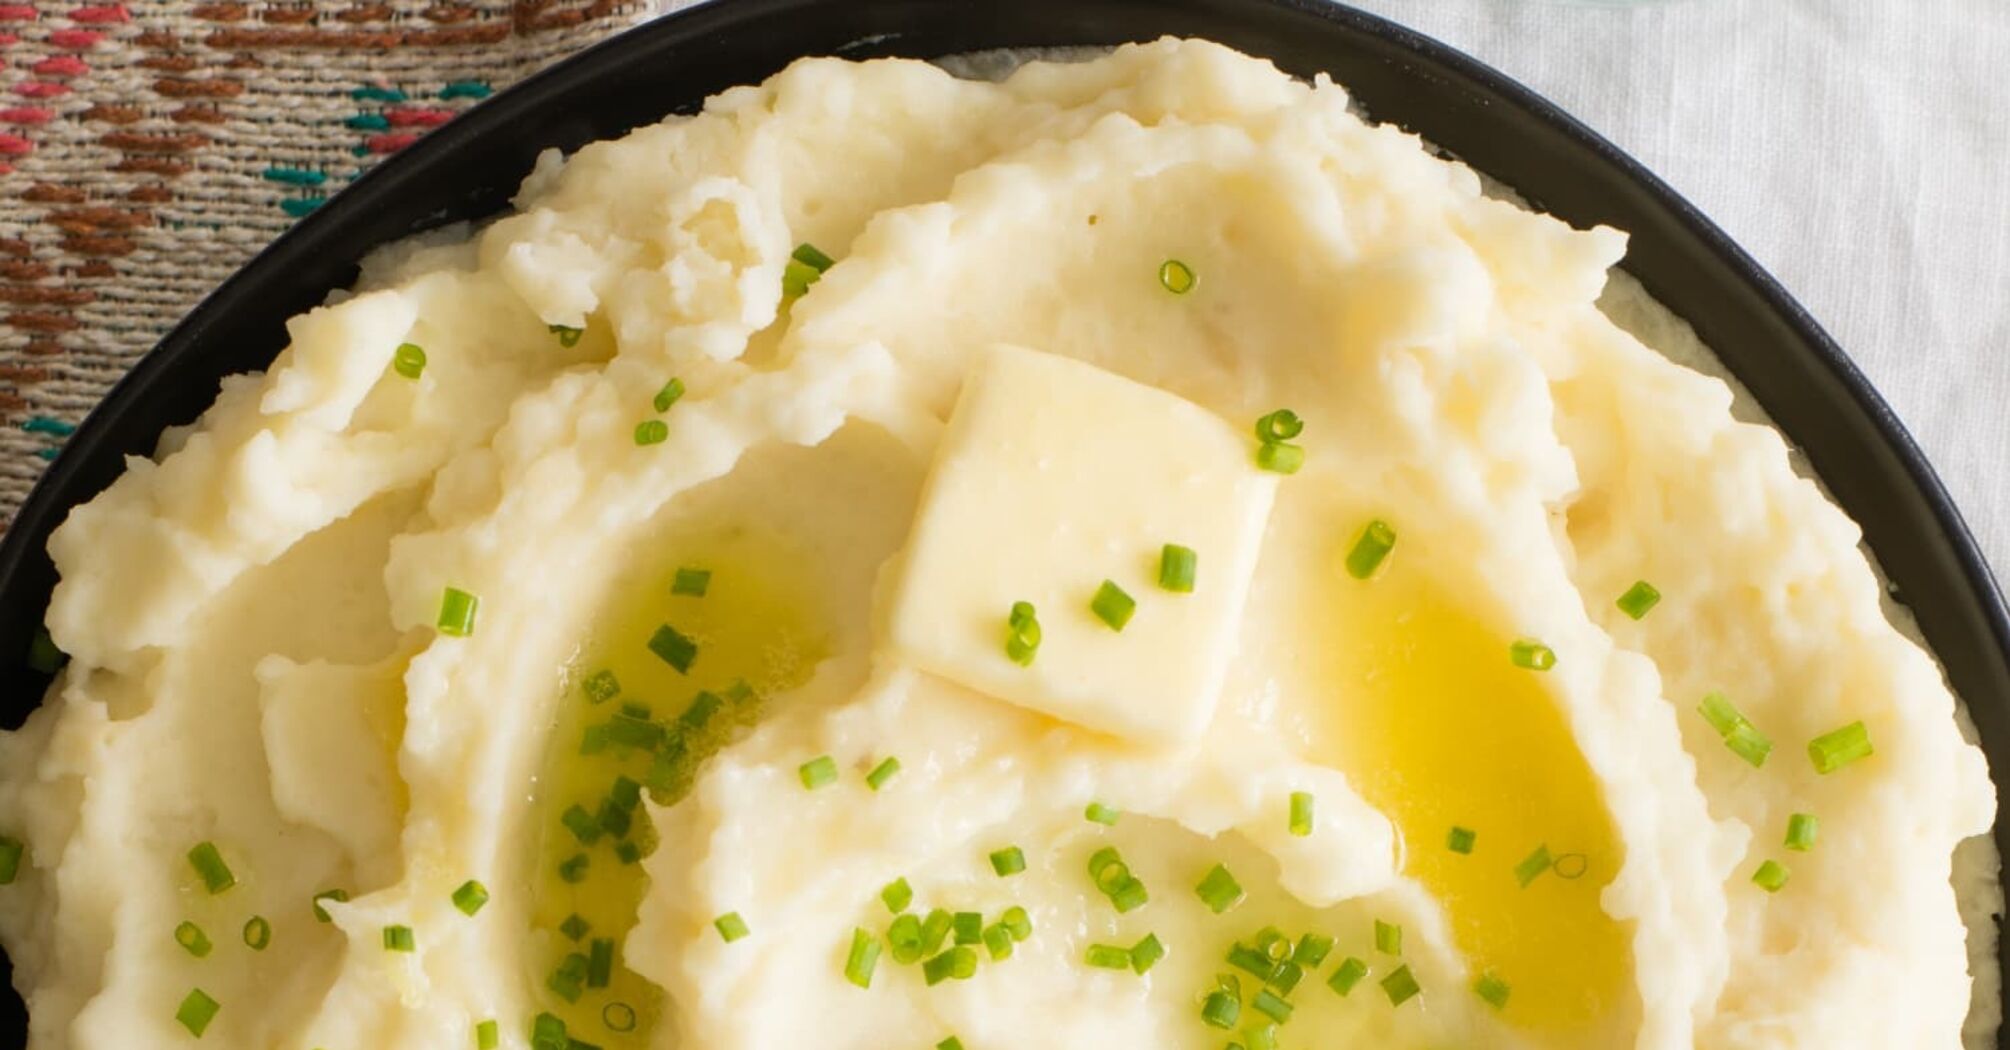 How to reheat frozen mashed potatoes